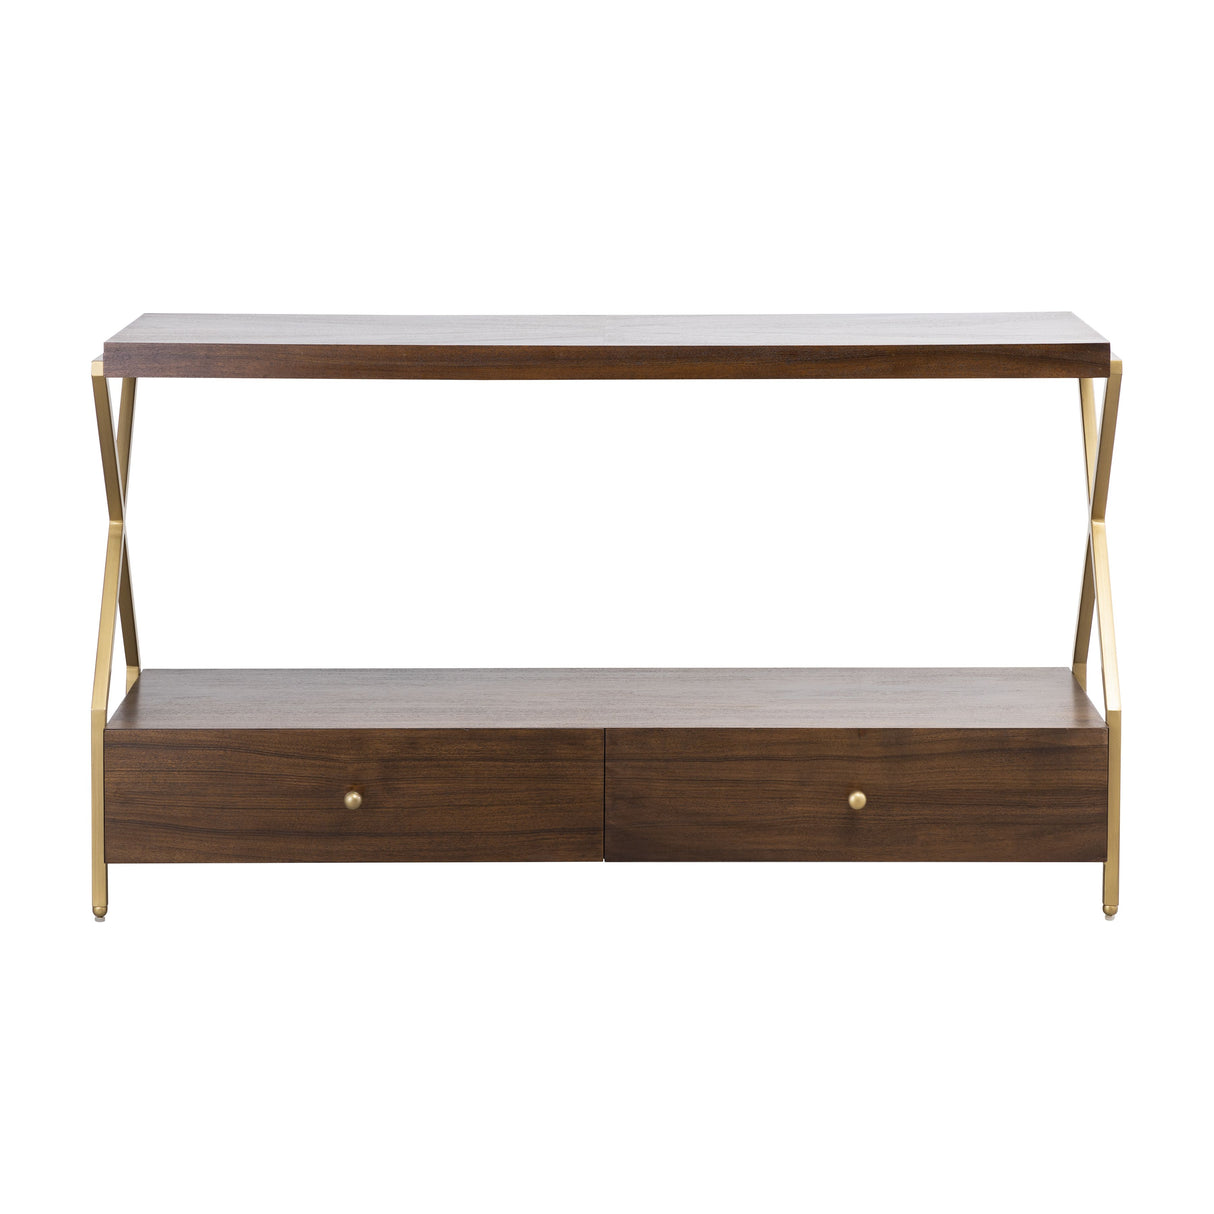 Elk H0805-9909 Guilford Console Table - Mahogany